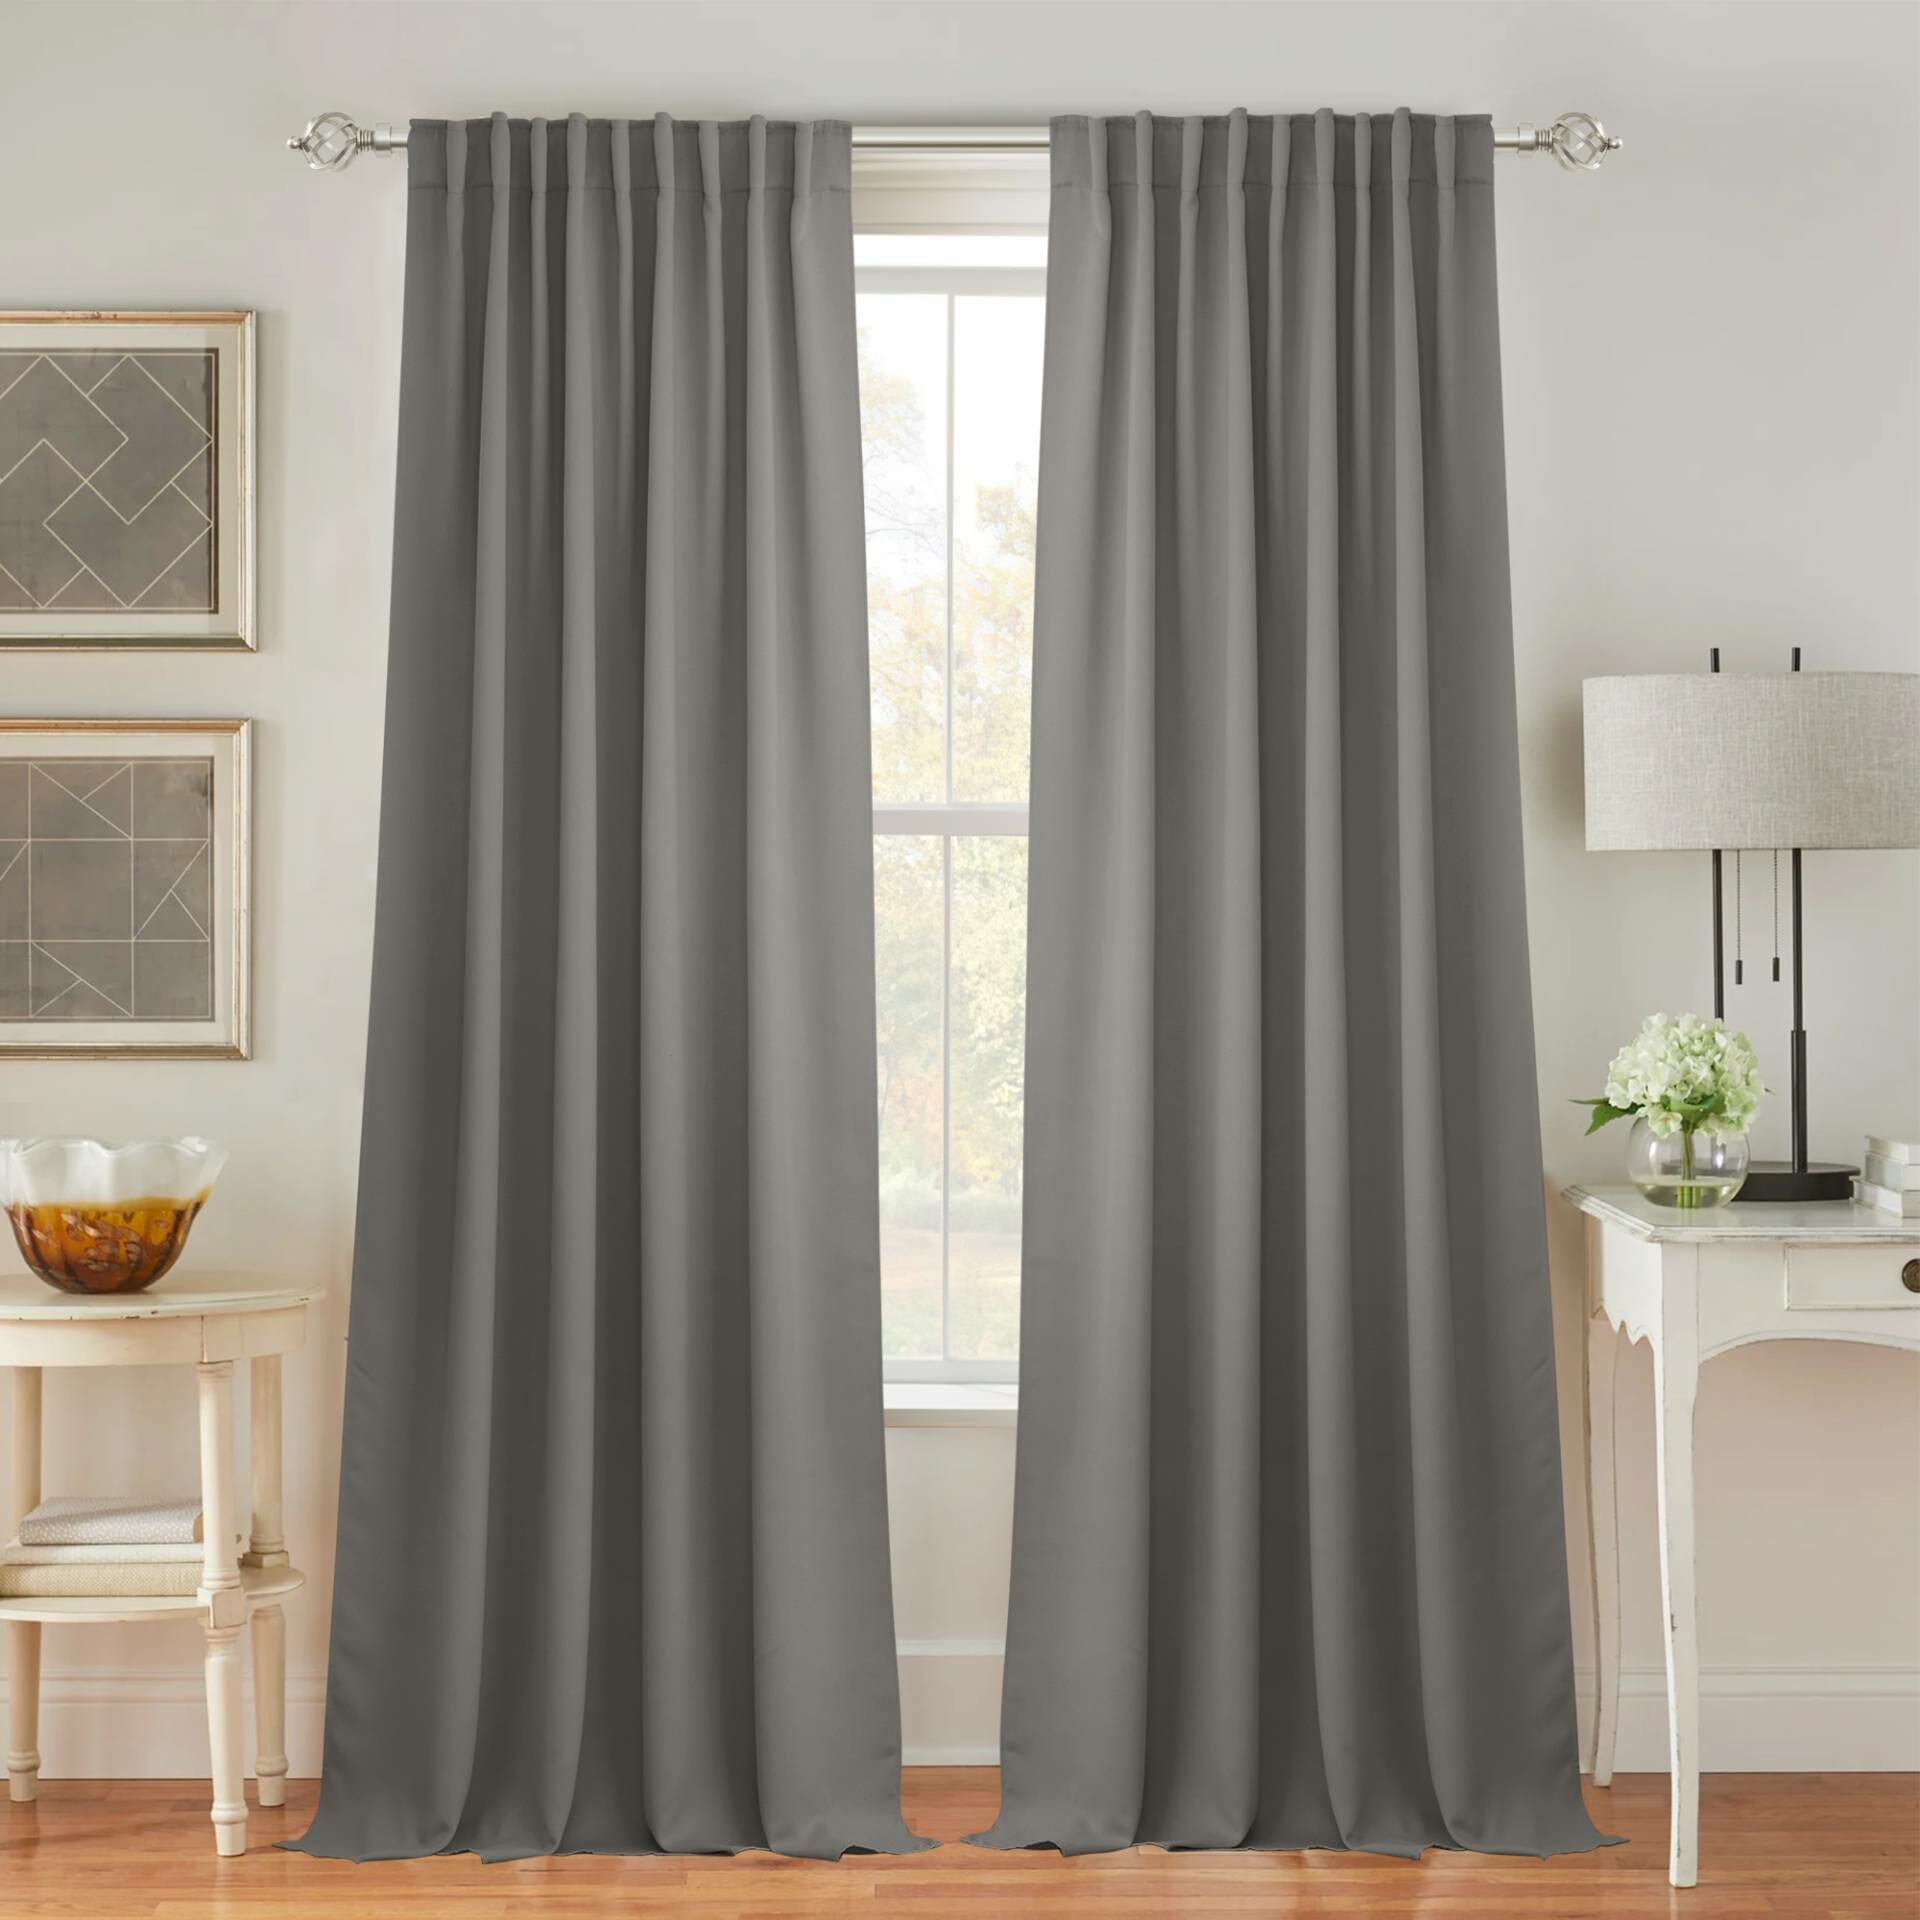 Thermal curtains save on energy